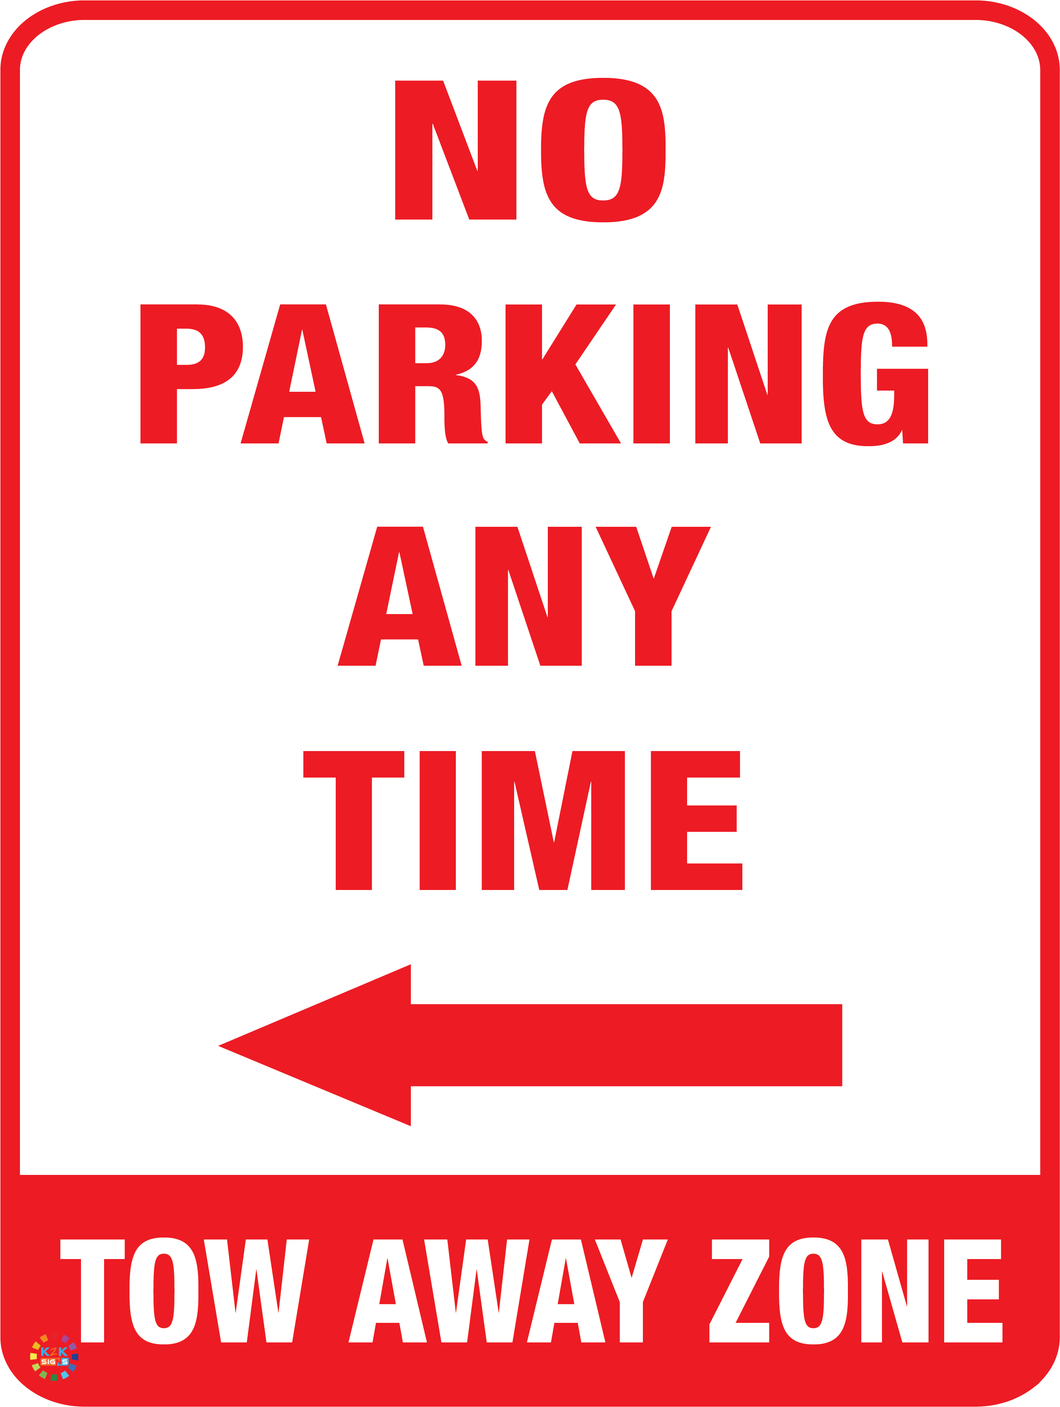 No Parking Any Time Tow Away Zone (Left Arrow) Sign